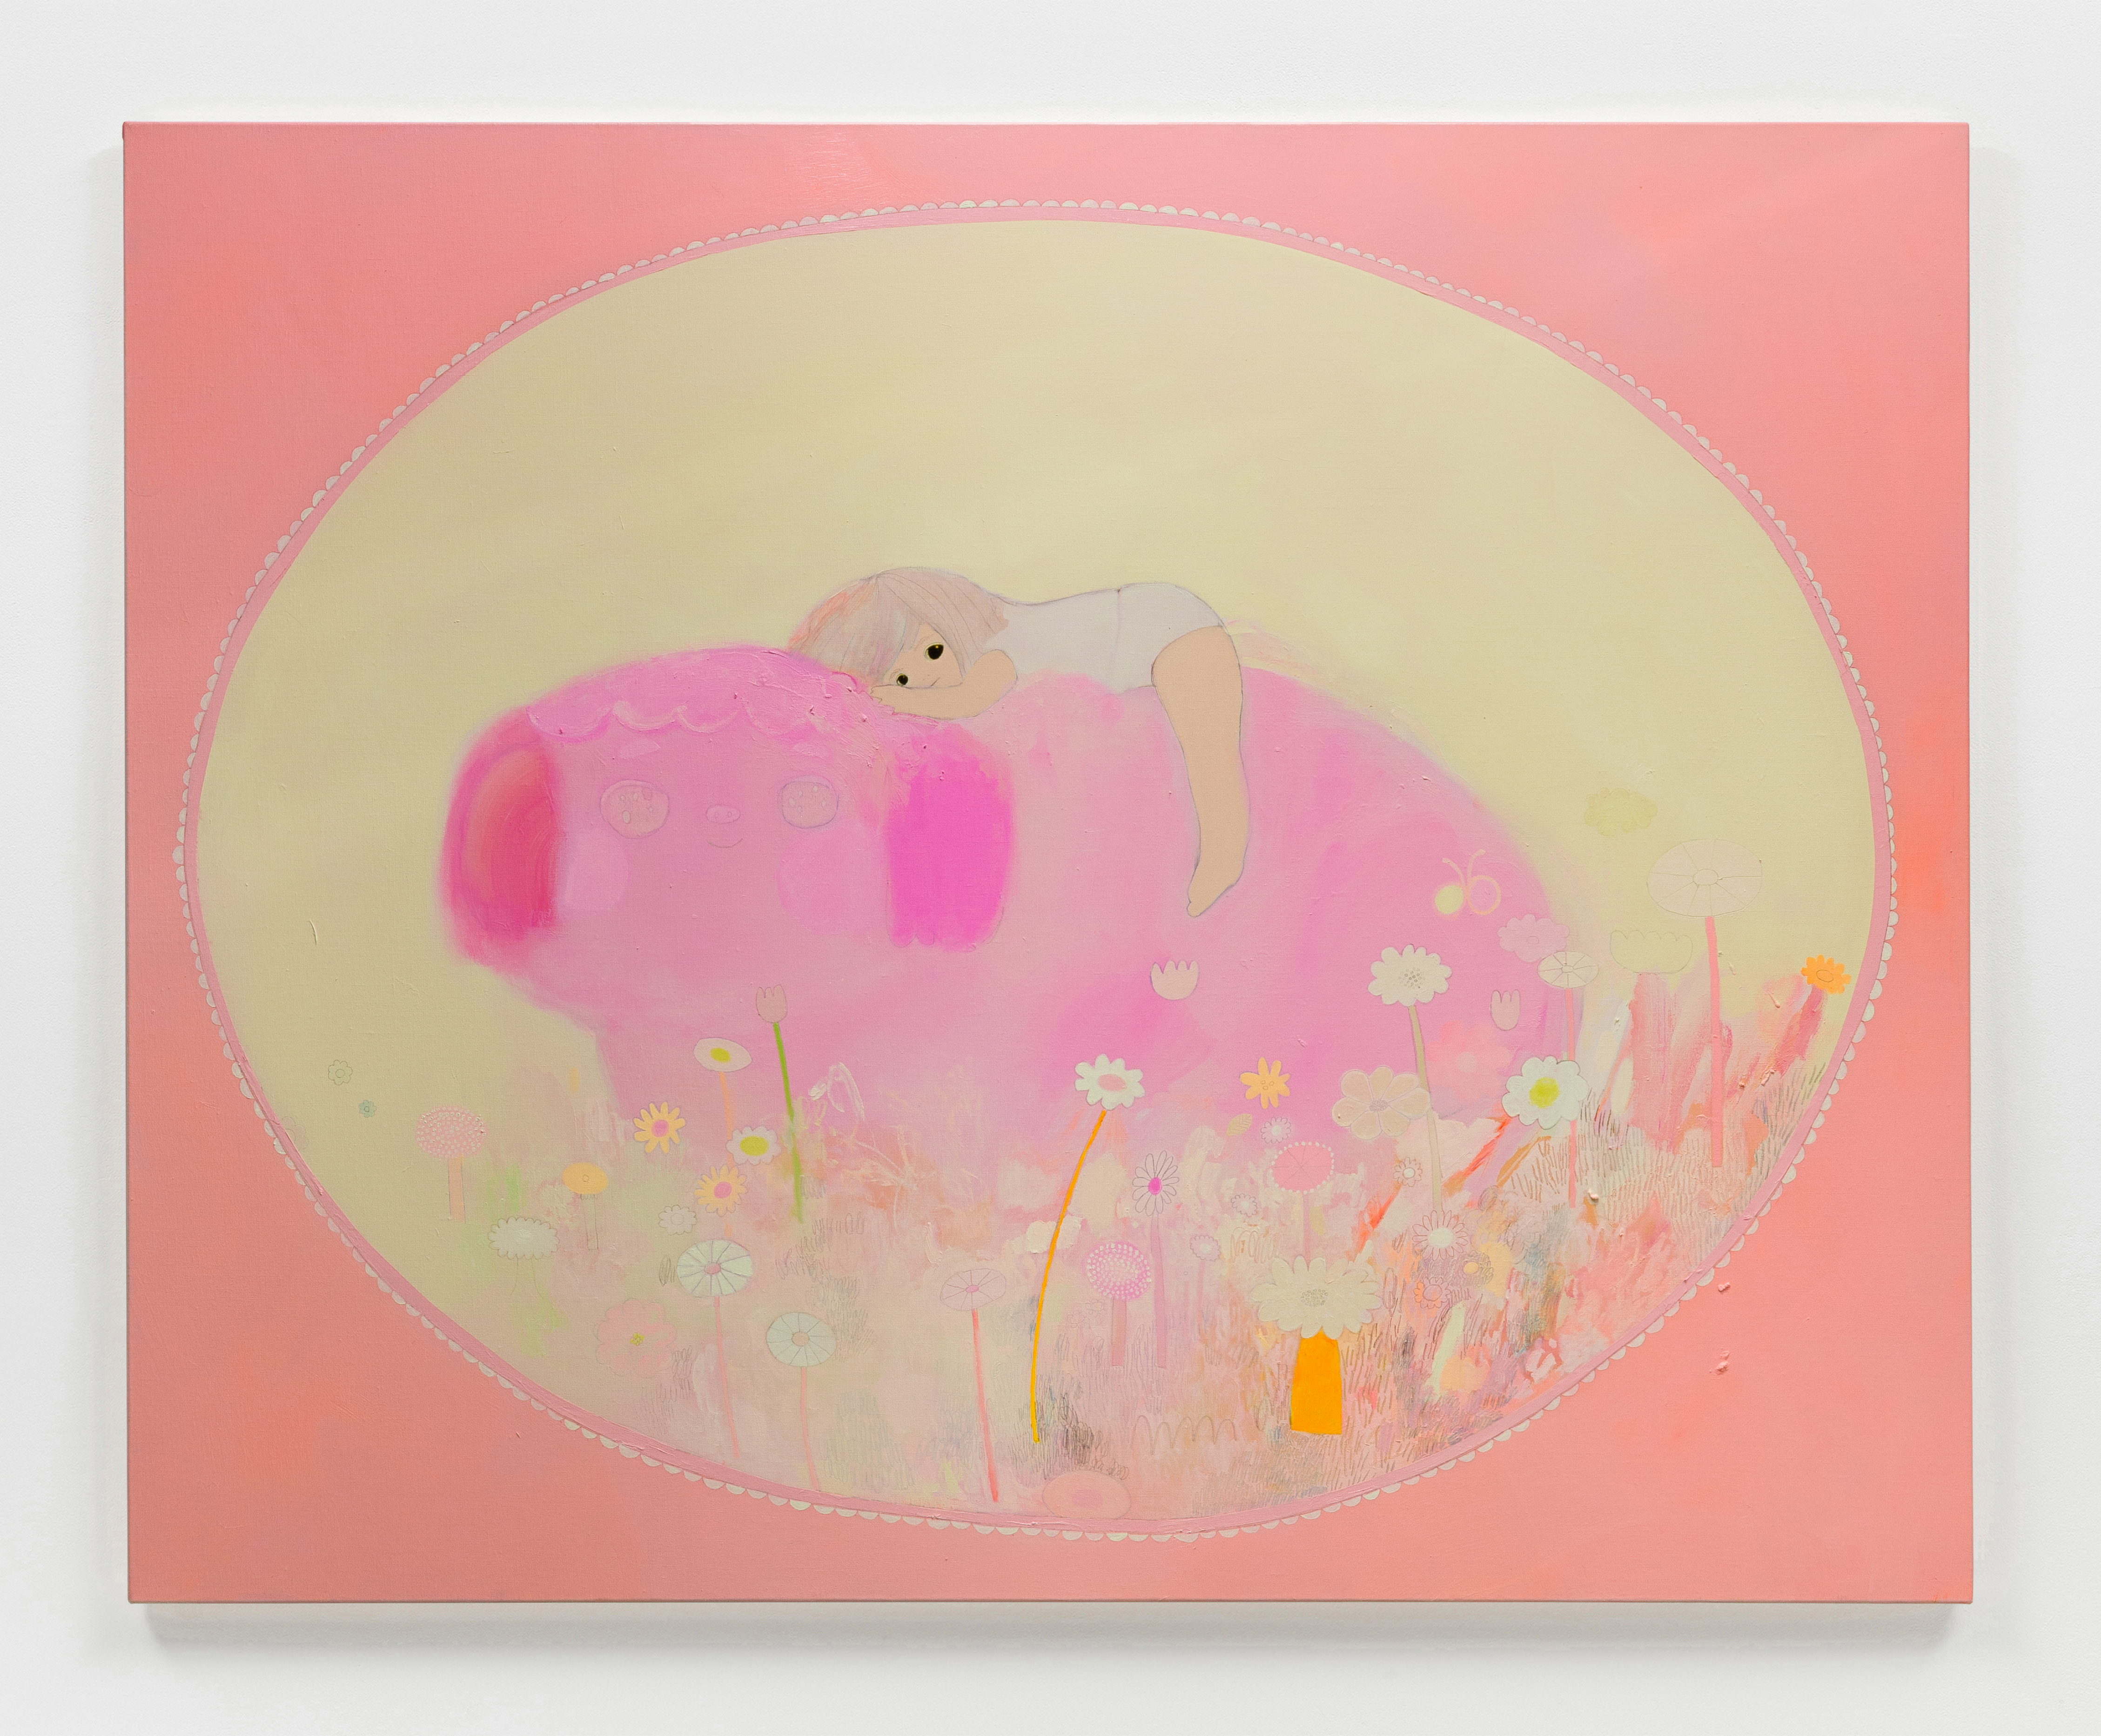 Tomoko Nagai, Large Pink Dog, 2022, oil and glitter on canvas, 130.3 x 162 cm, 51 1/4 x 63 3/4 in